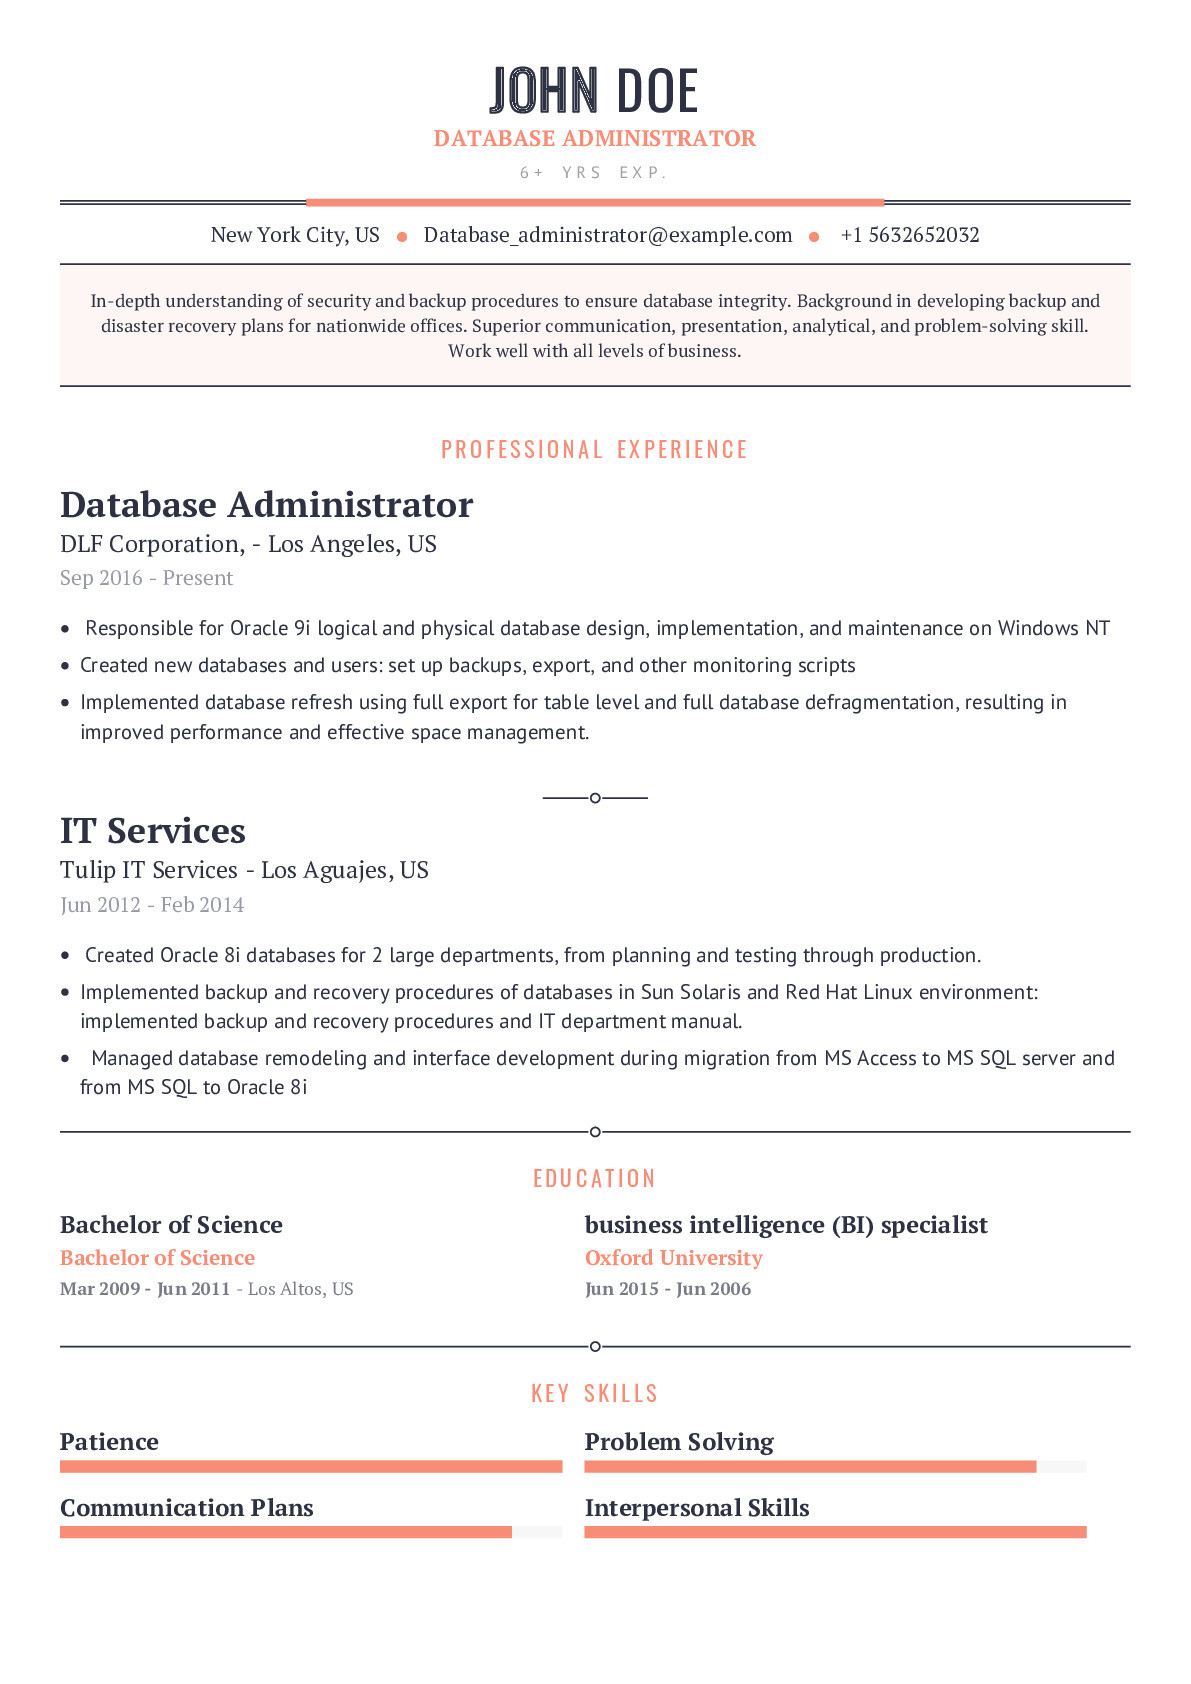 Oracle Dba 1 Year Experience Resume Sample Database Administrator Resume Example with Content Sample Craftmycv